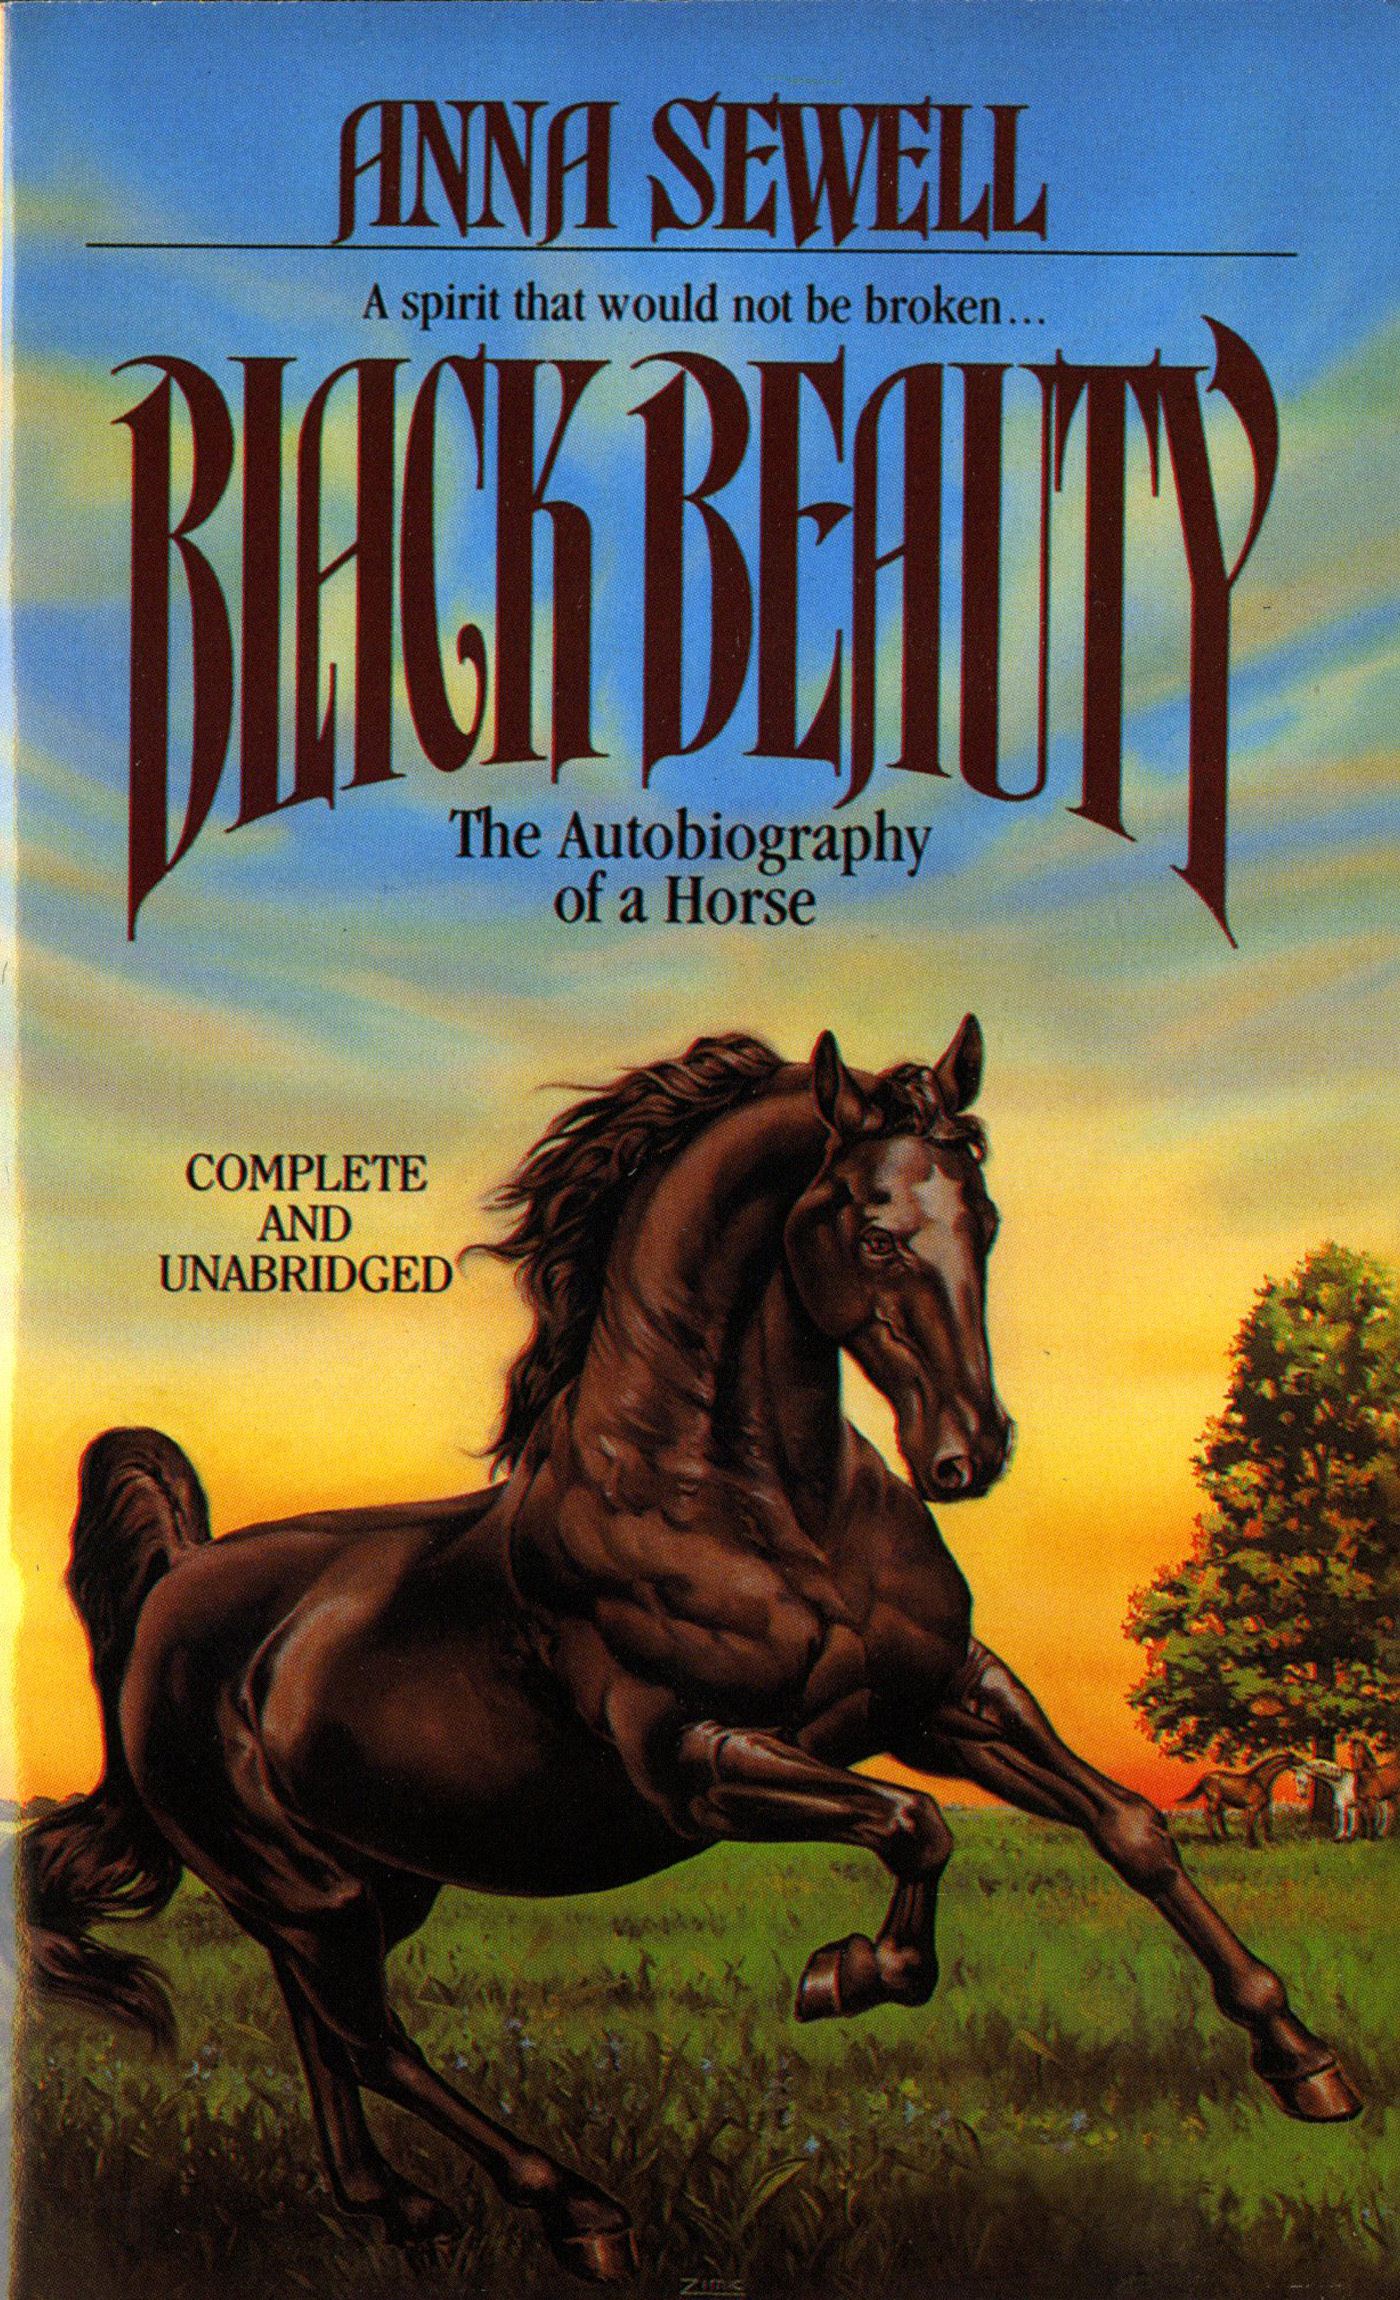 Black Beauty : The Autobiography of a Horse by Anna Sewell